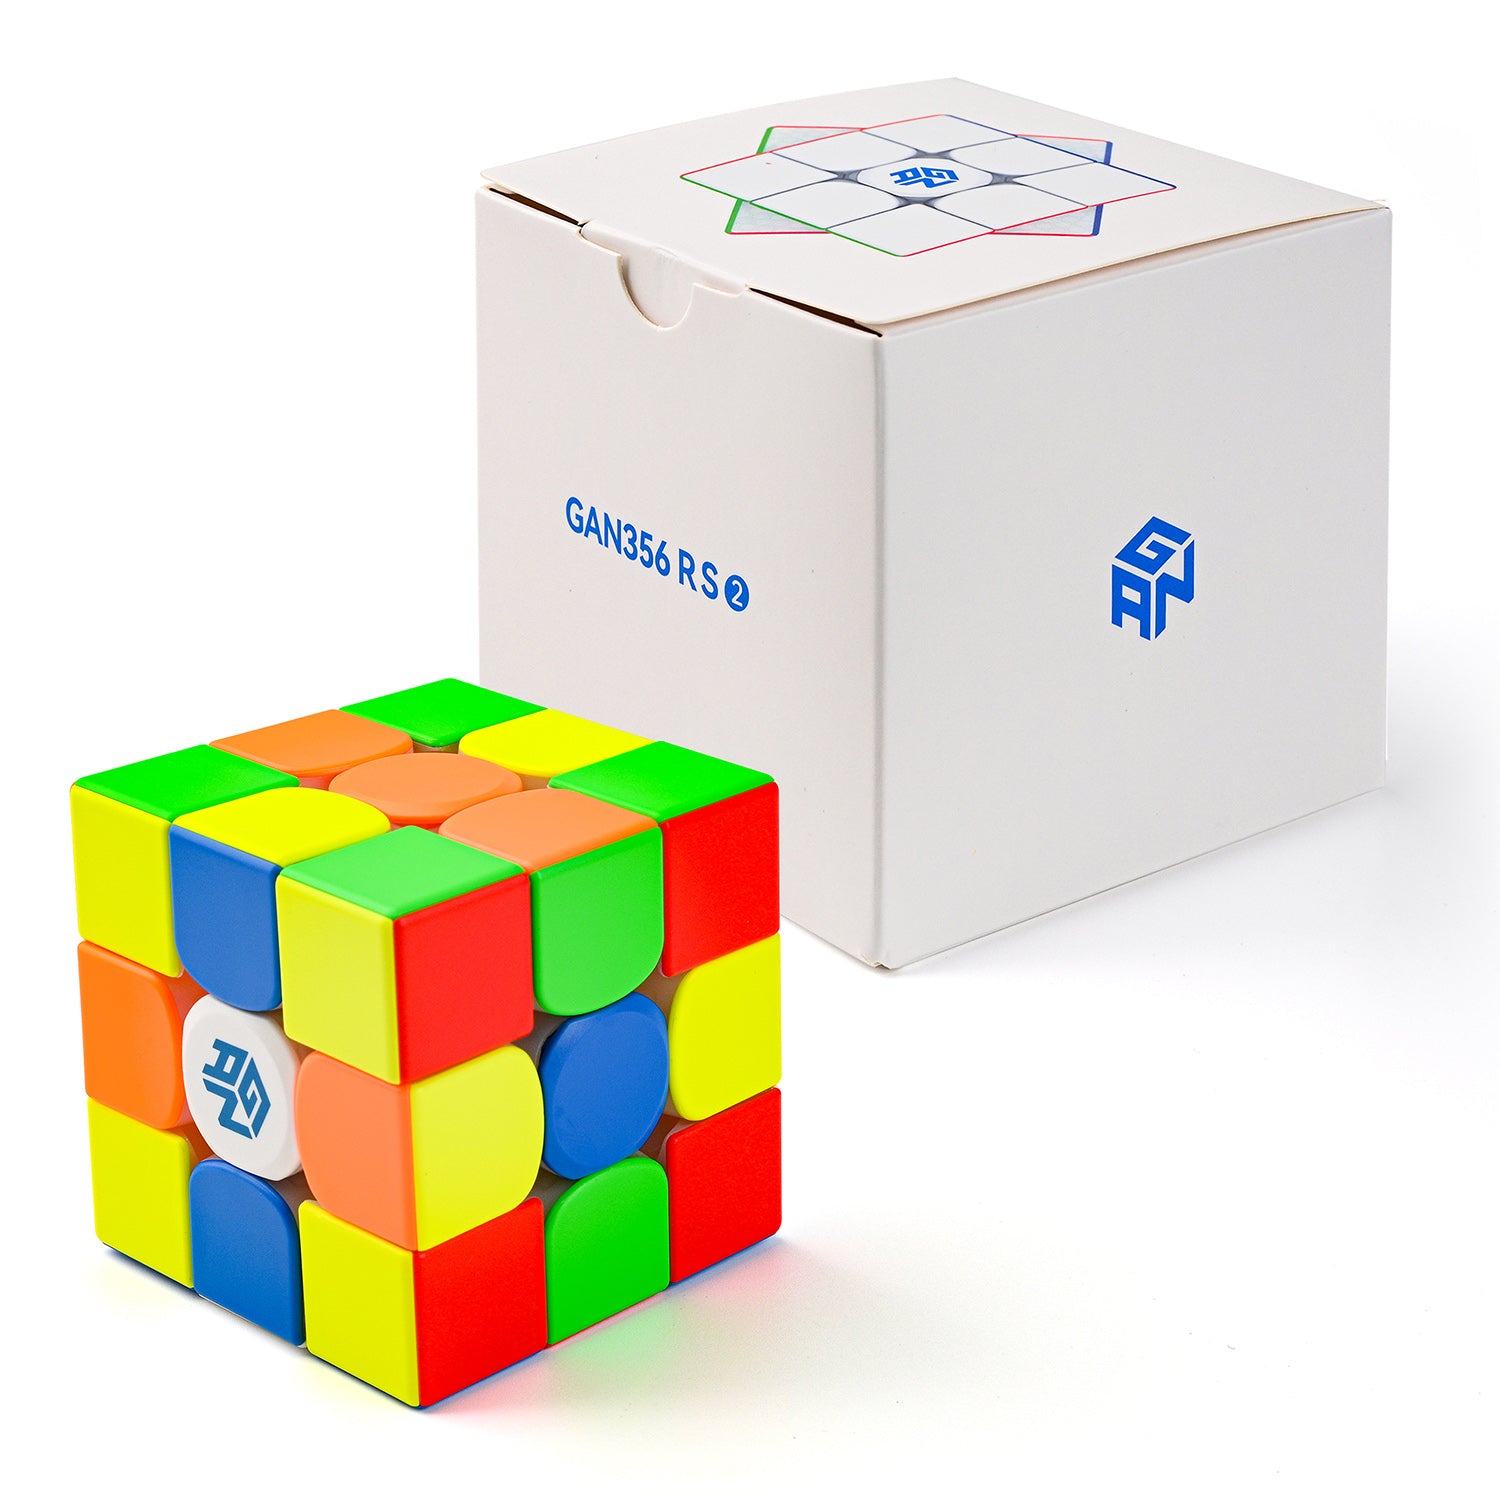 GAN 356 RS2 3x3 Magnetic Speed Cube